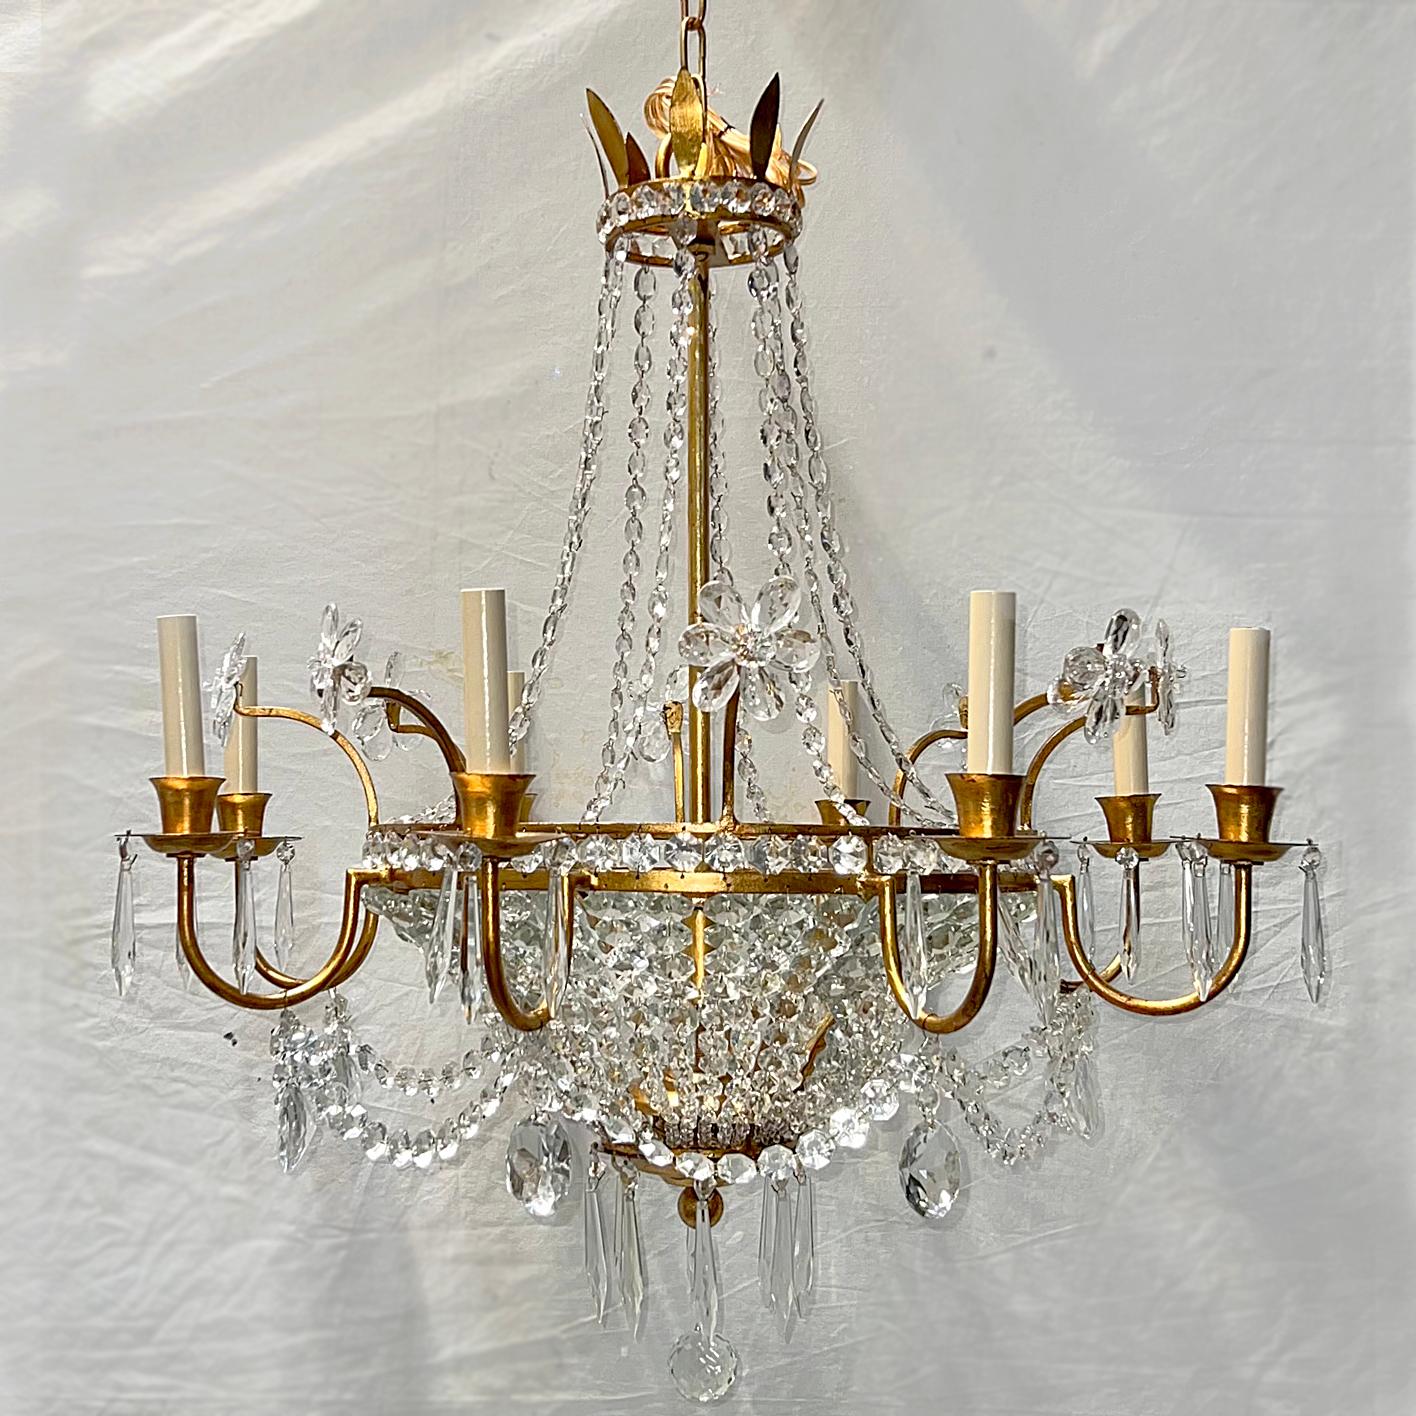 Mid-20th Century Gilt Metal and Crystals Chandelier with Crystal Flowers For Sale